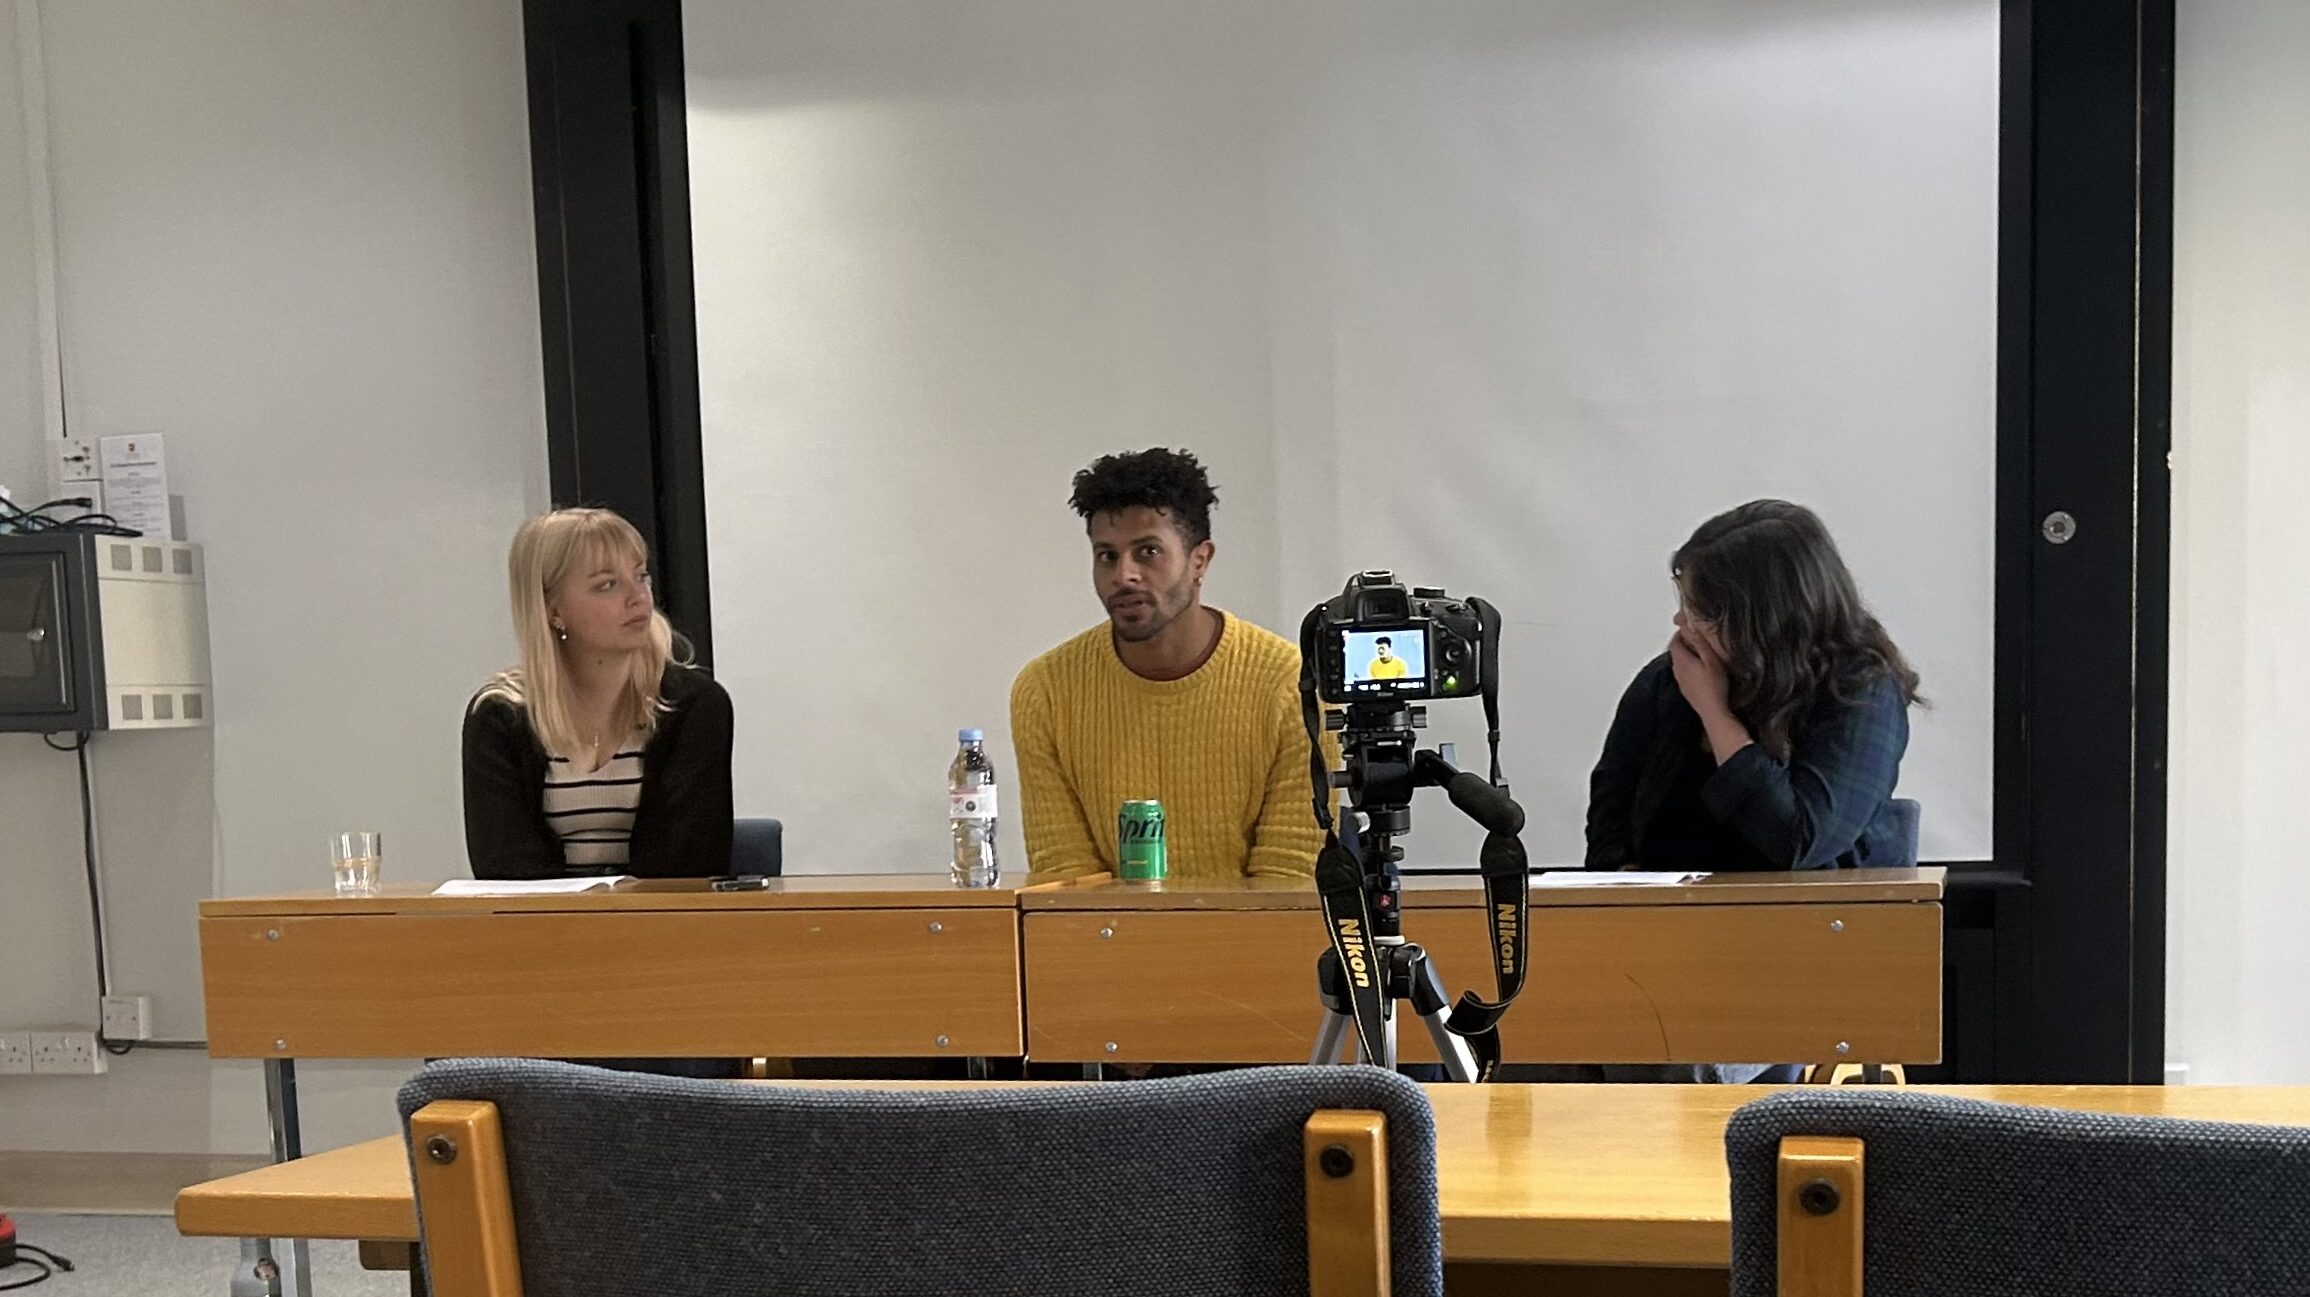 A panel with three individuals sat in a classroom.